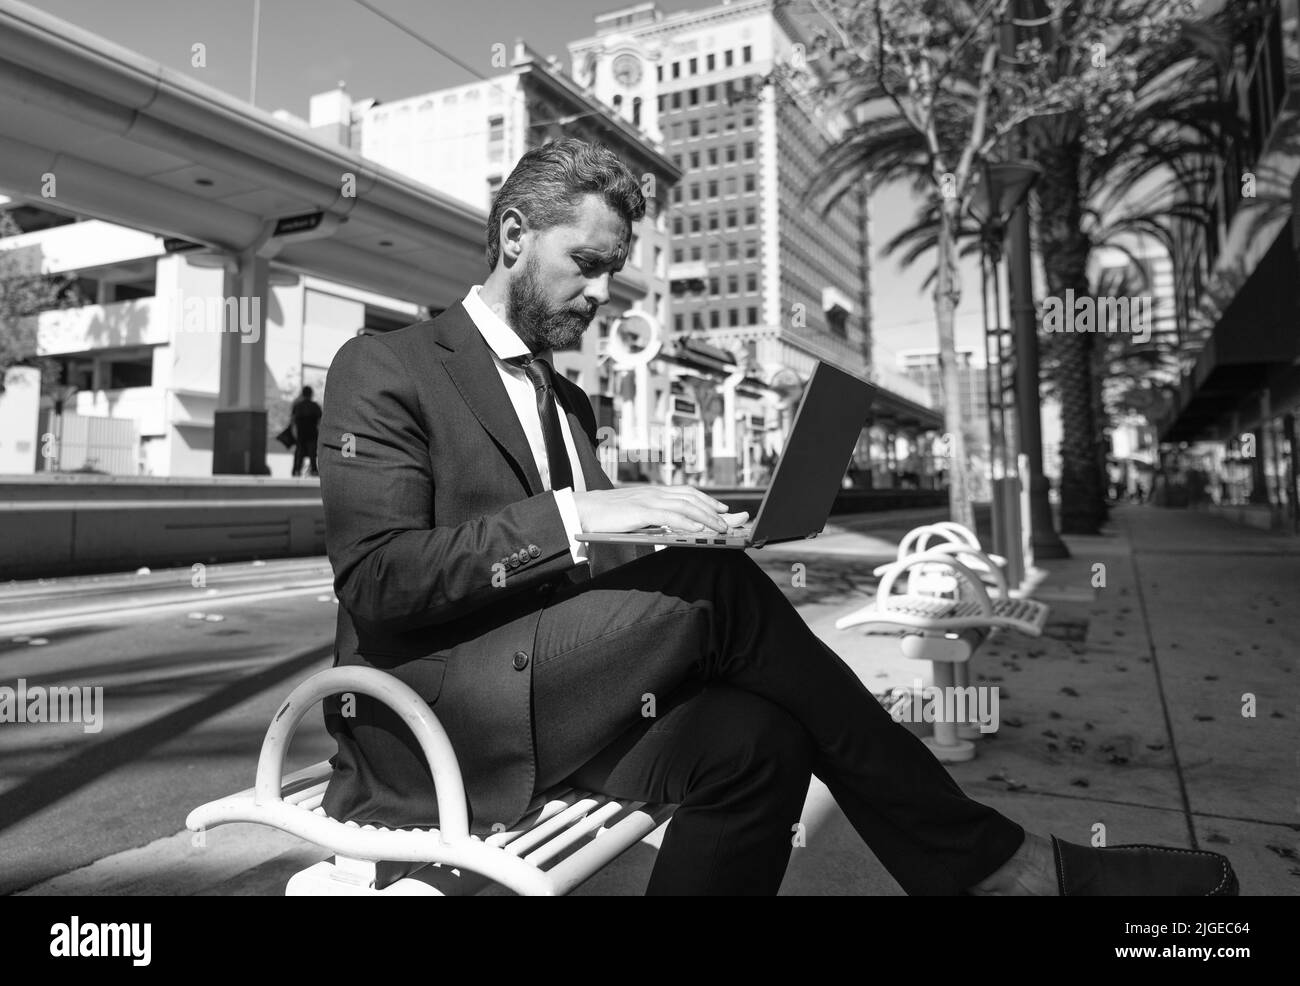 mature man businessman in suit sit on bench in outdoor city working online on laptop, office online Stock Photo